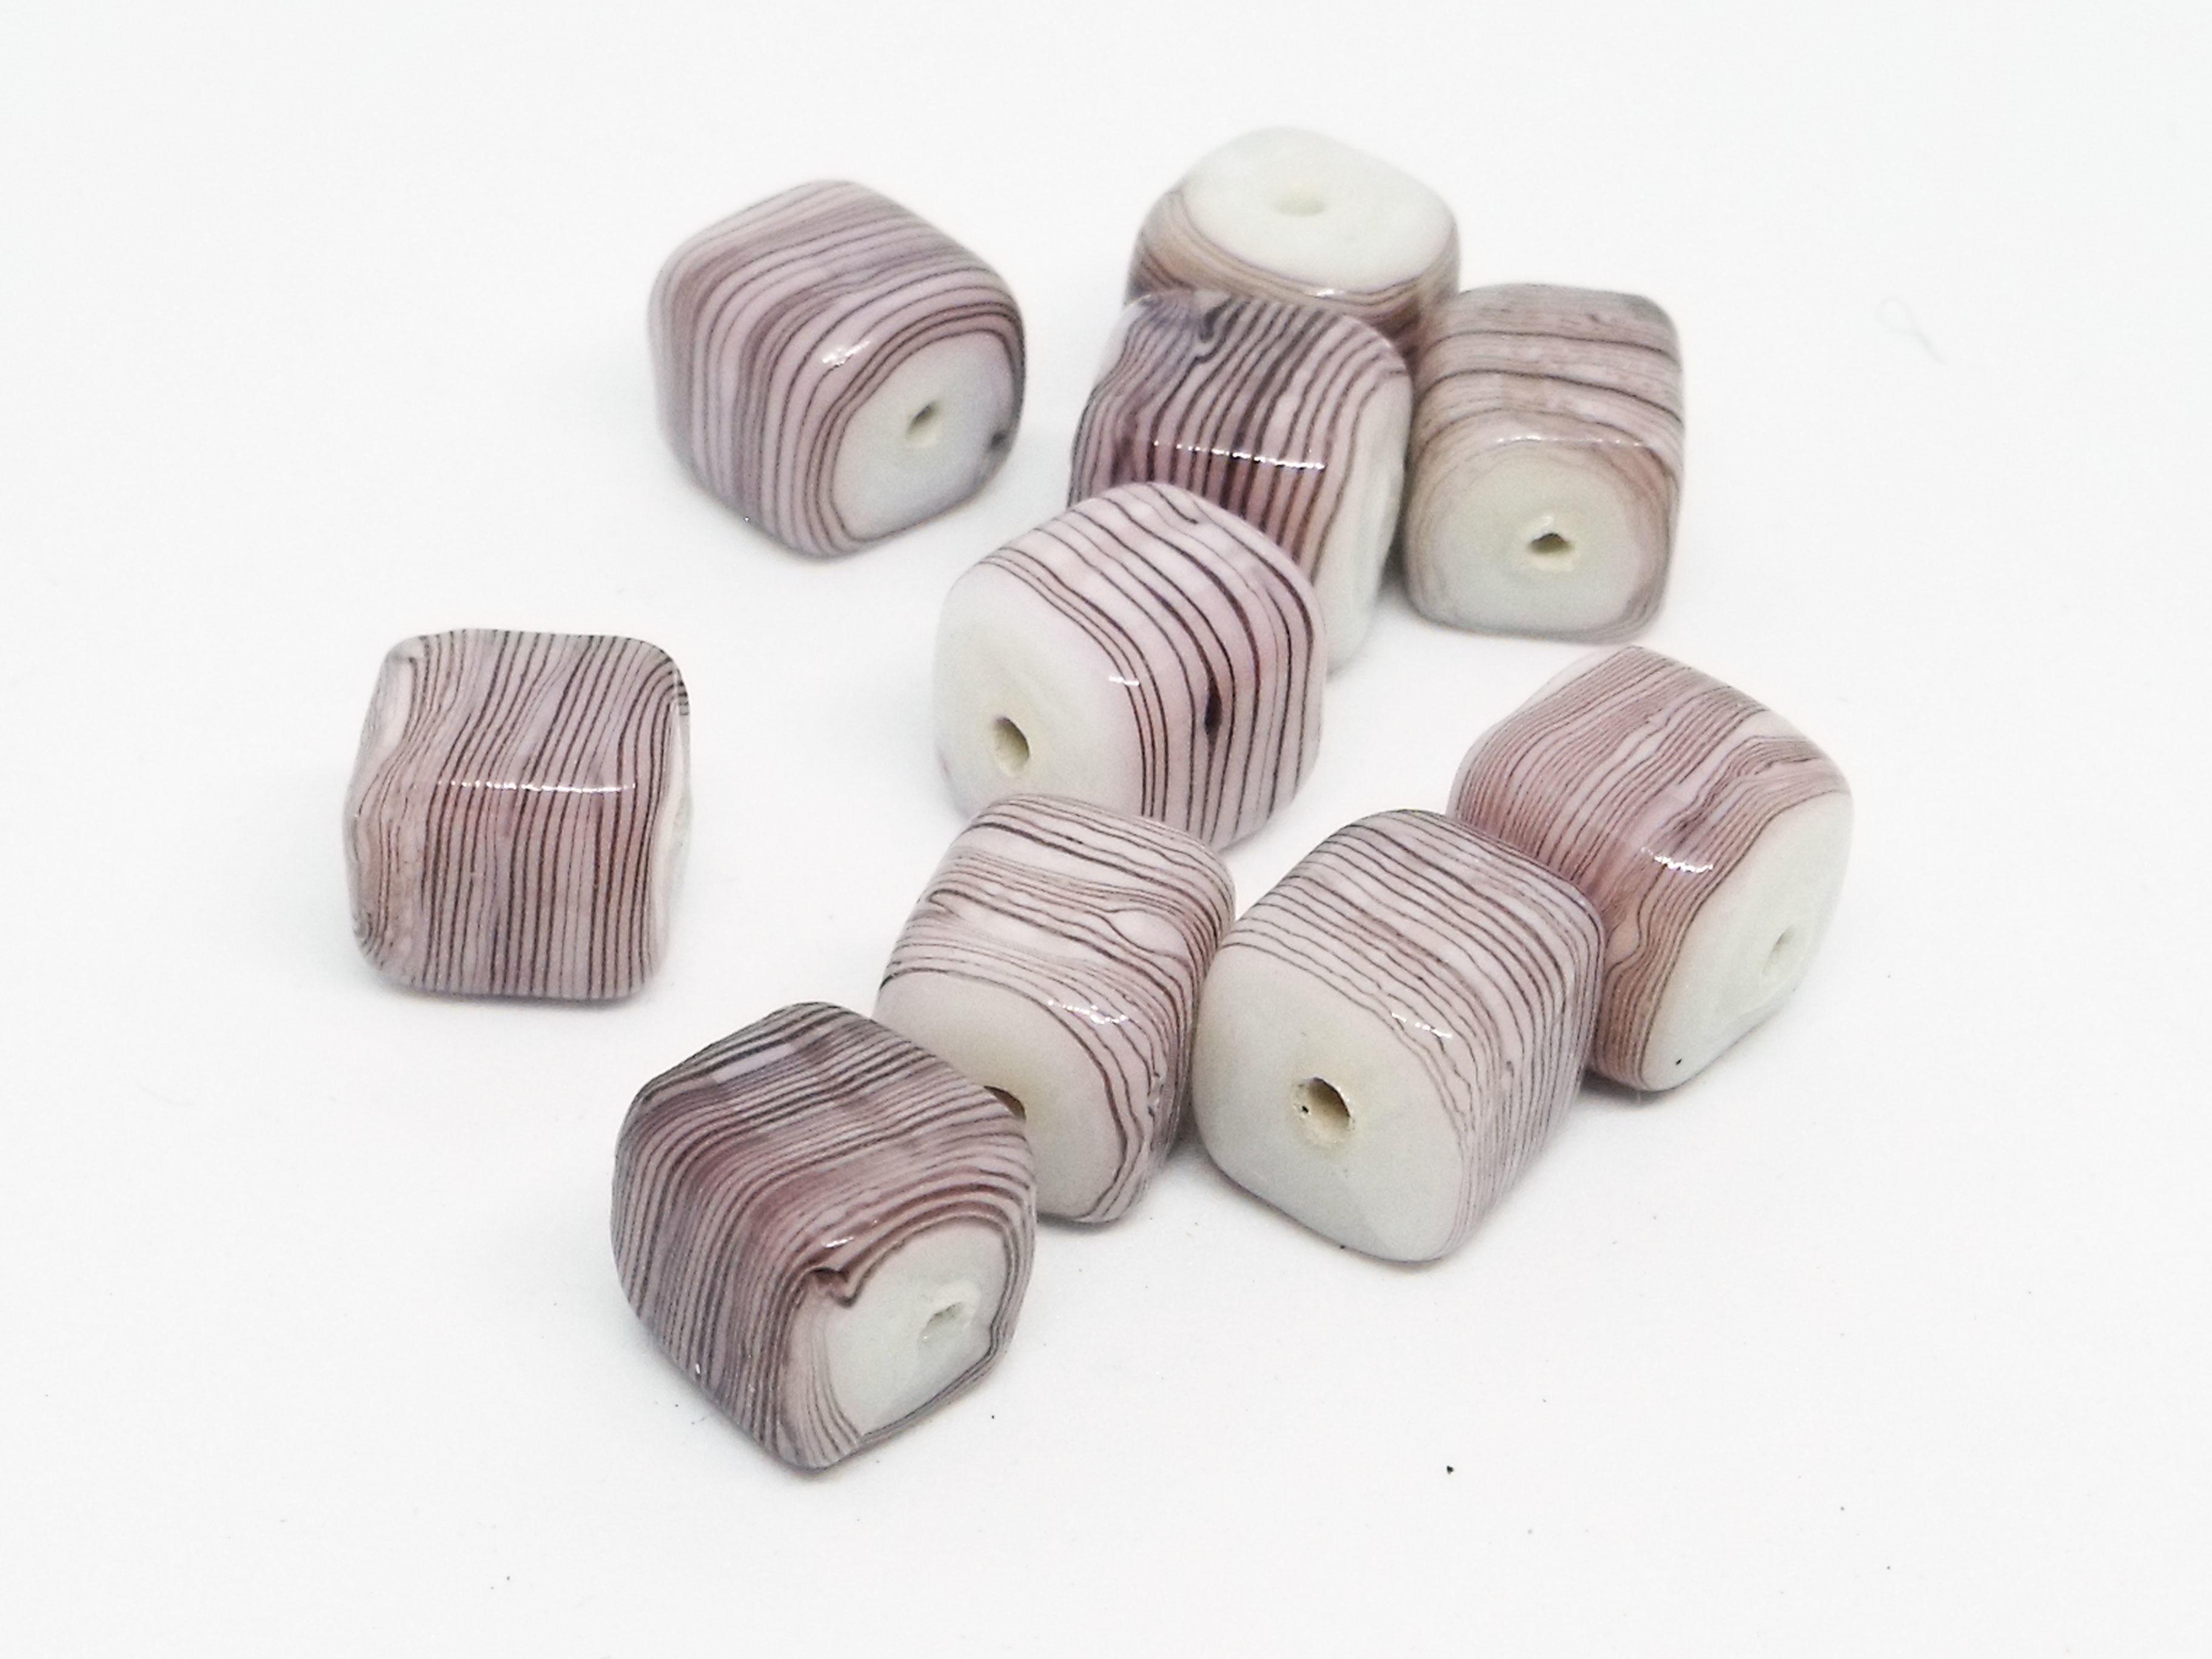 9x9mm Glass Cube Bead - White Base with Purple and Black Stripes